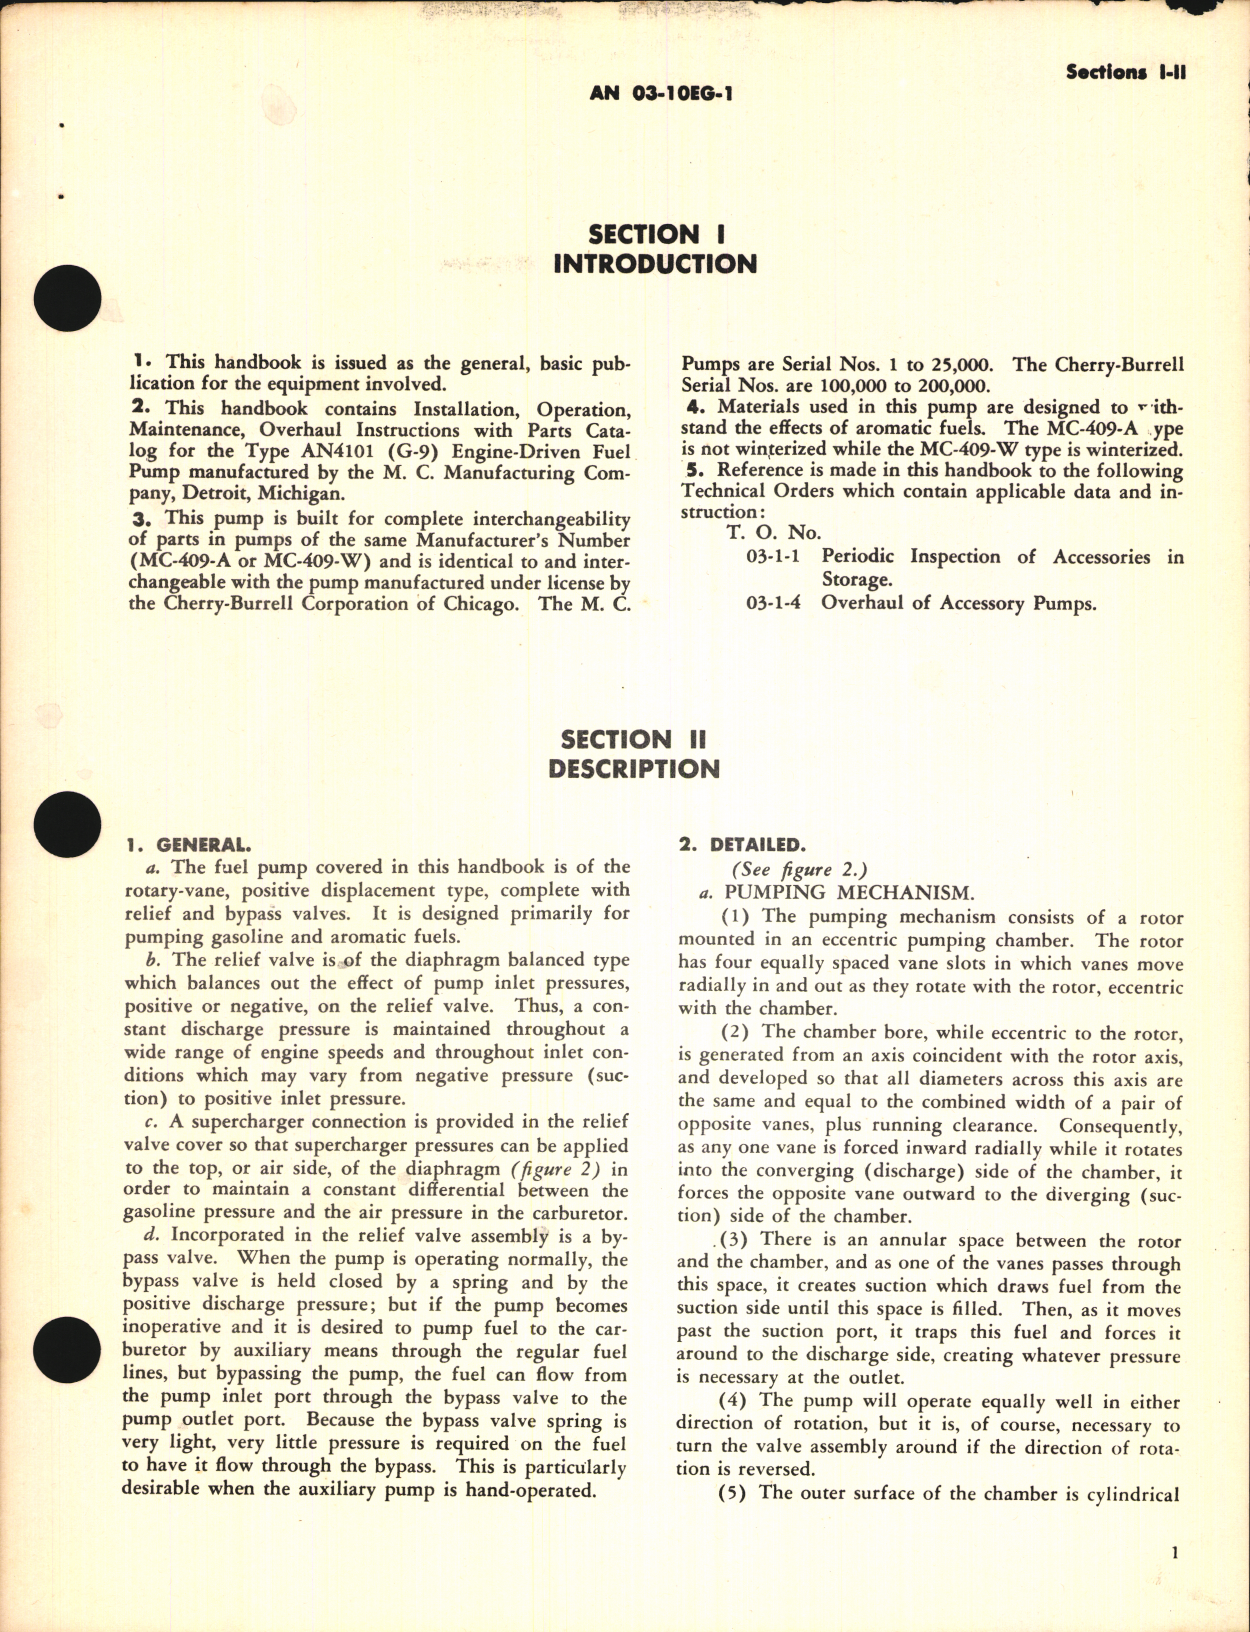 Sample page 5 from AirCorps Library document: Operation, Service, & Overhaul Instructions with Parts Catalog for Engine-Driven Fuel Pump Type AN4101 (G-9)